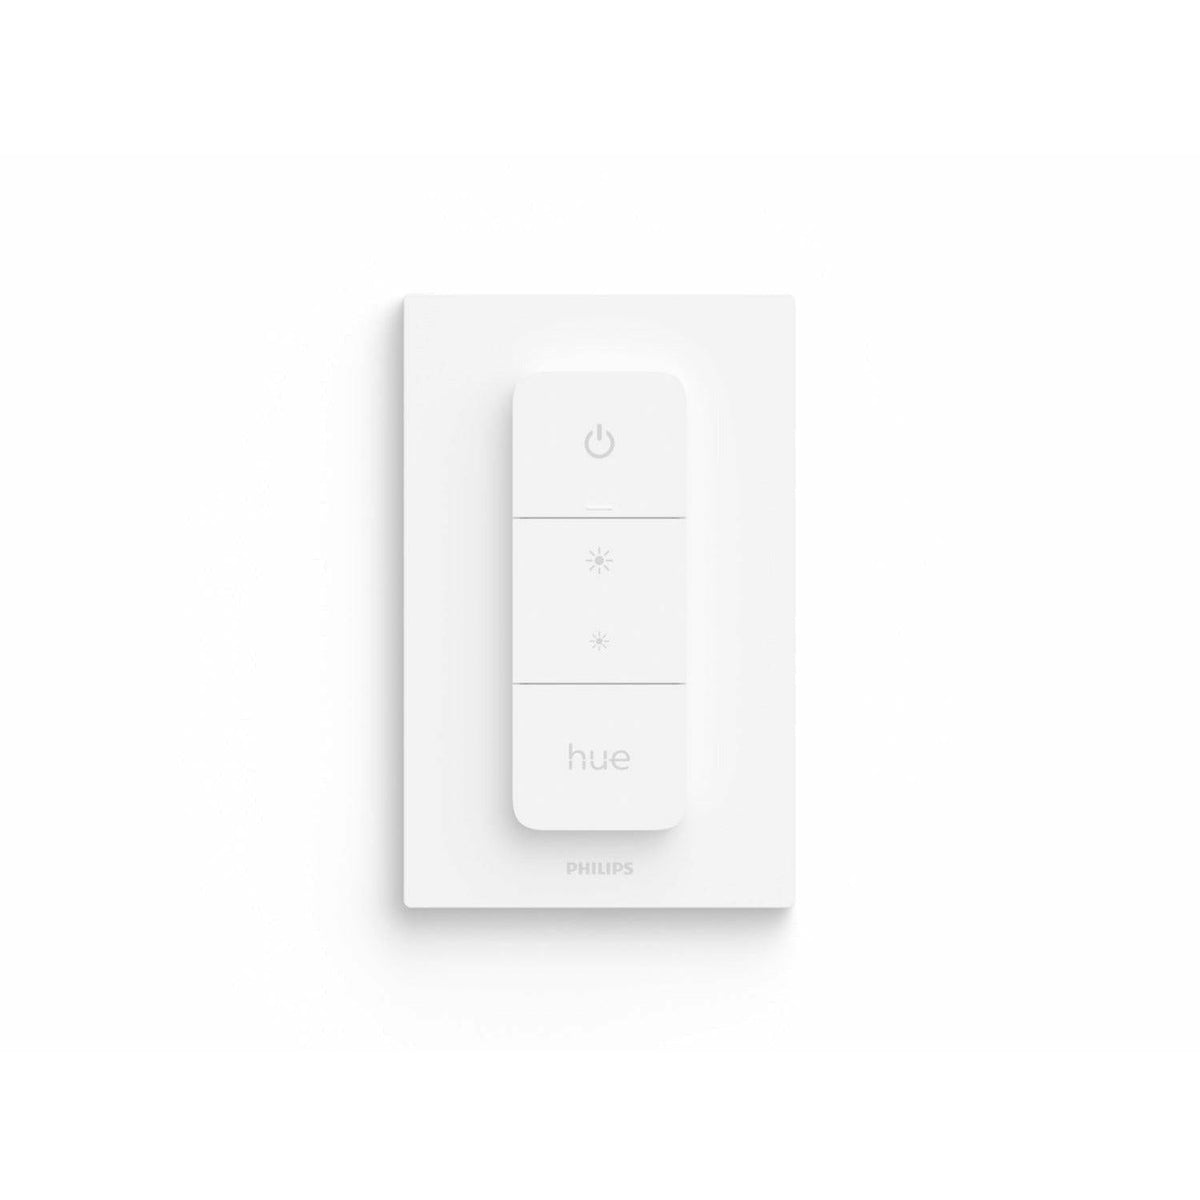 Philips Hue Dimmer Switch - White | 929002398602 (7489374421180)